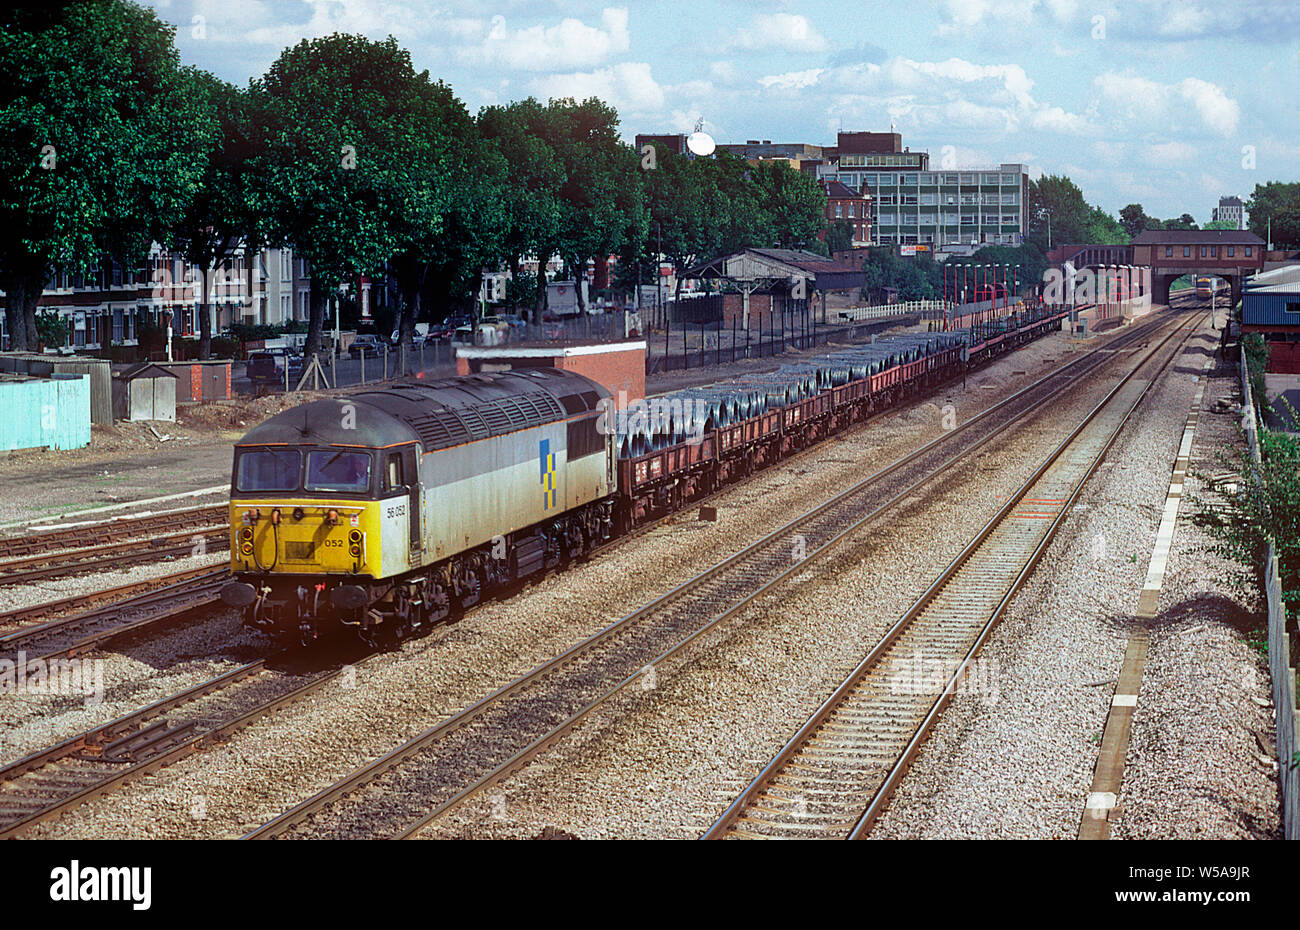 A class 56 diesel locomotive number 56052 working a freight train loaded with finished steel products at West Ealing on the 29th August 1992. Stock Photo